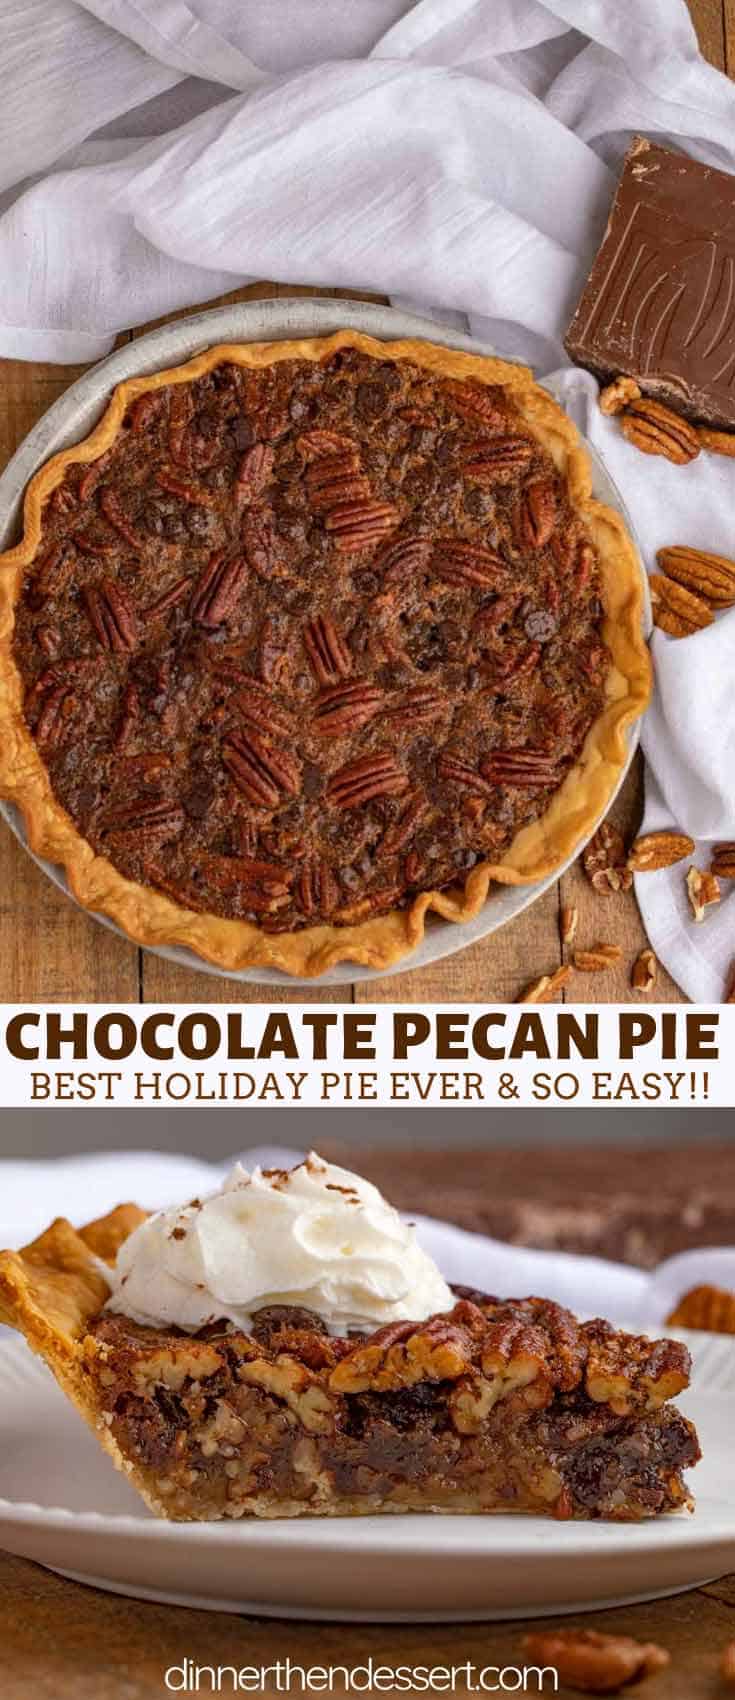 Rich and EASY Chocolate Pecan Pie PERFECT Holiday Pie Recipe